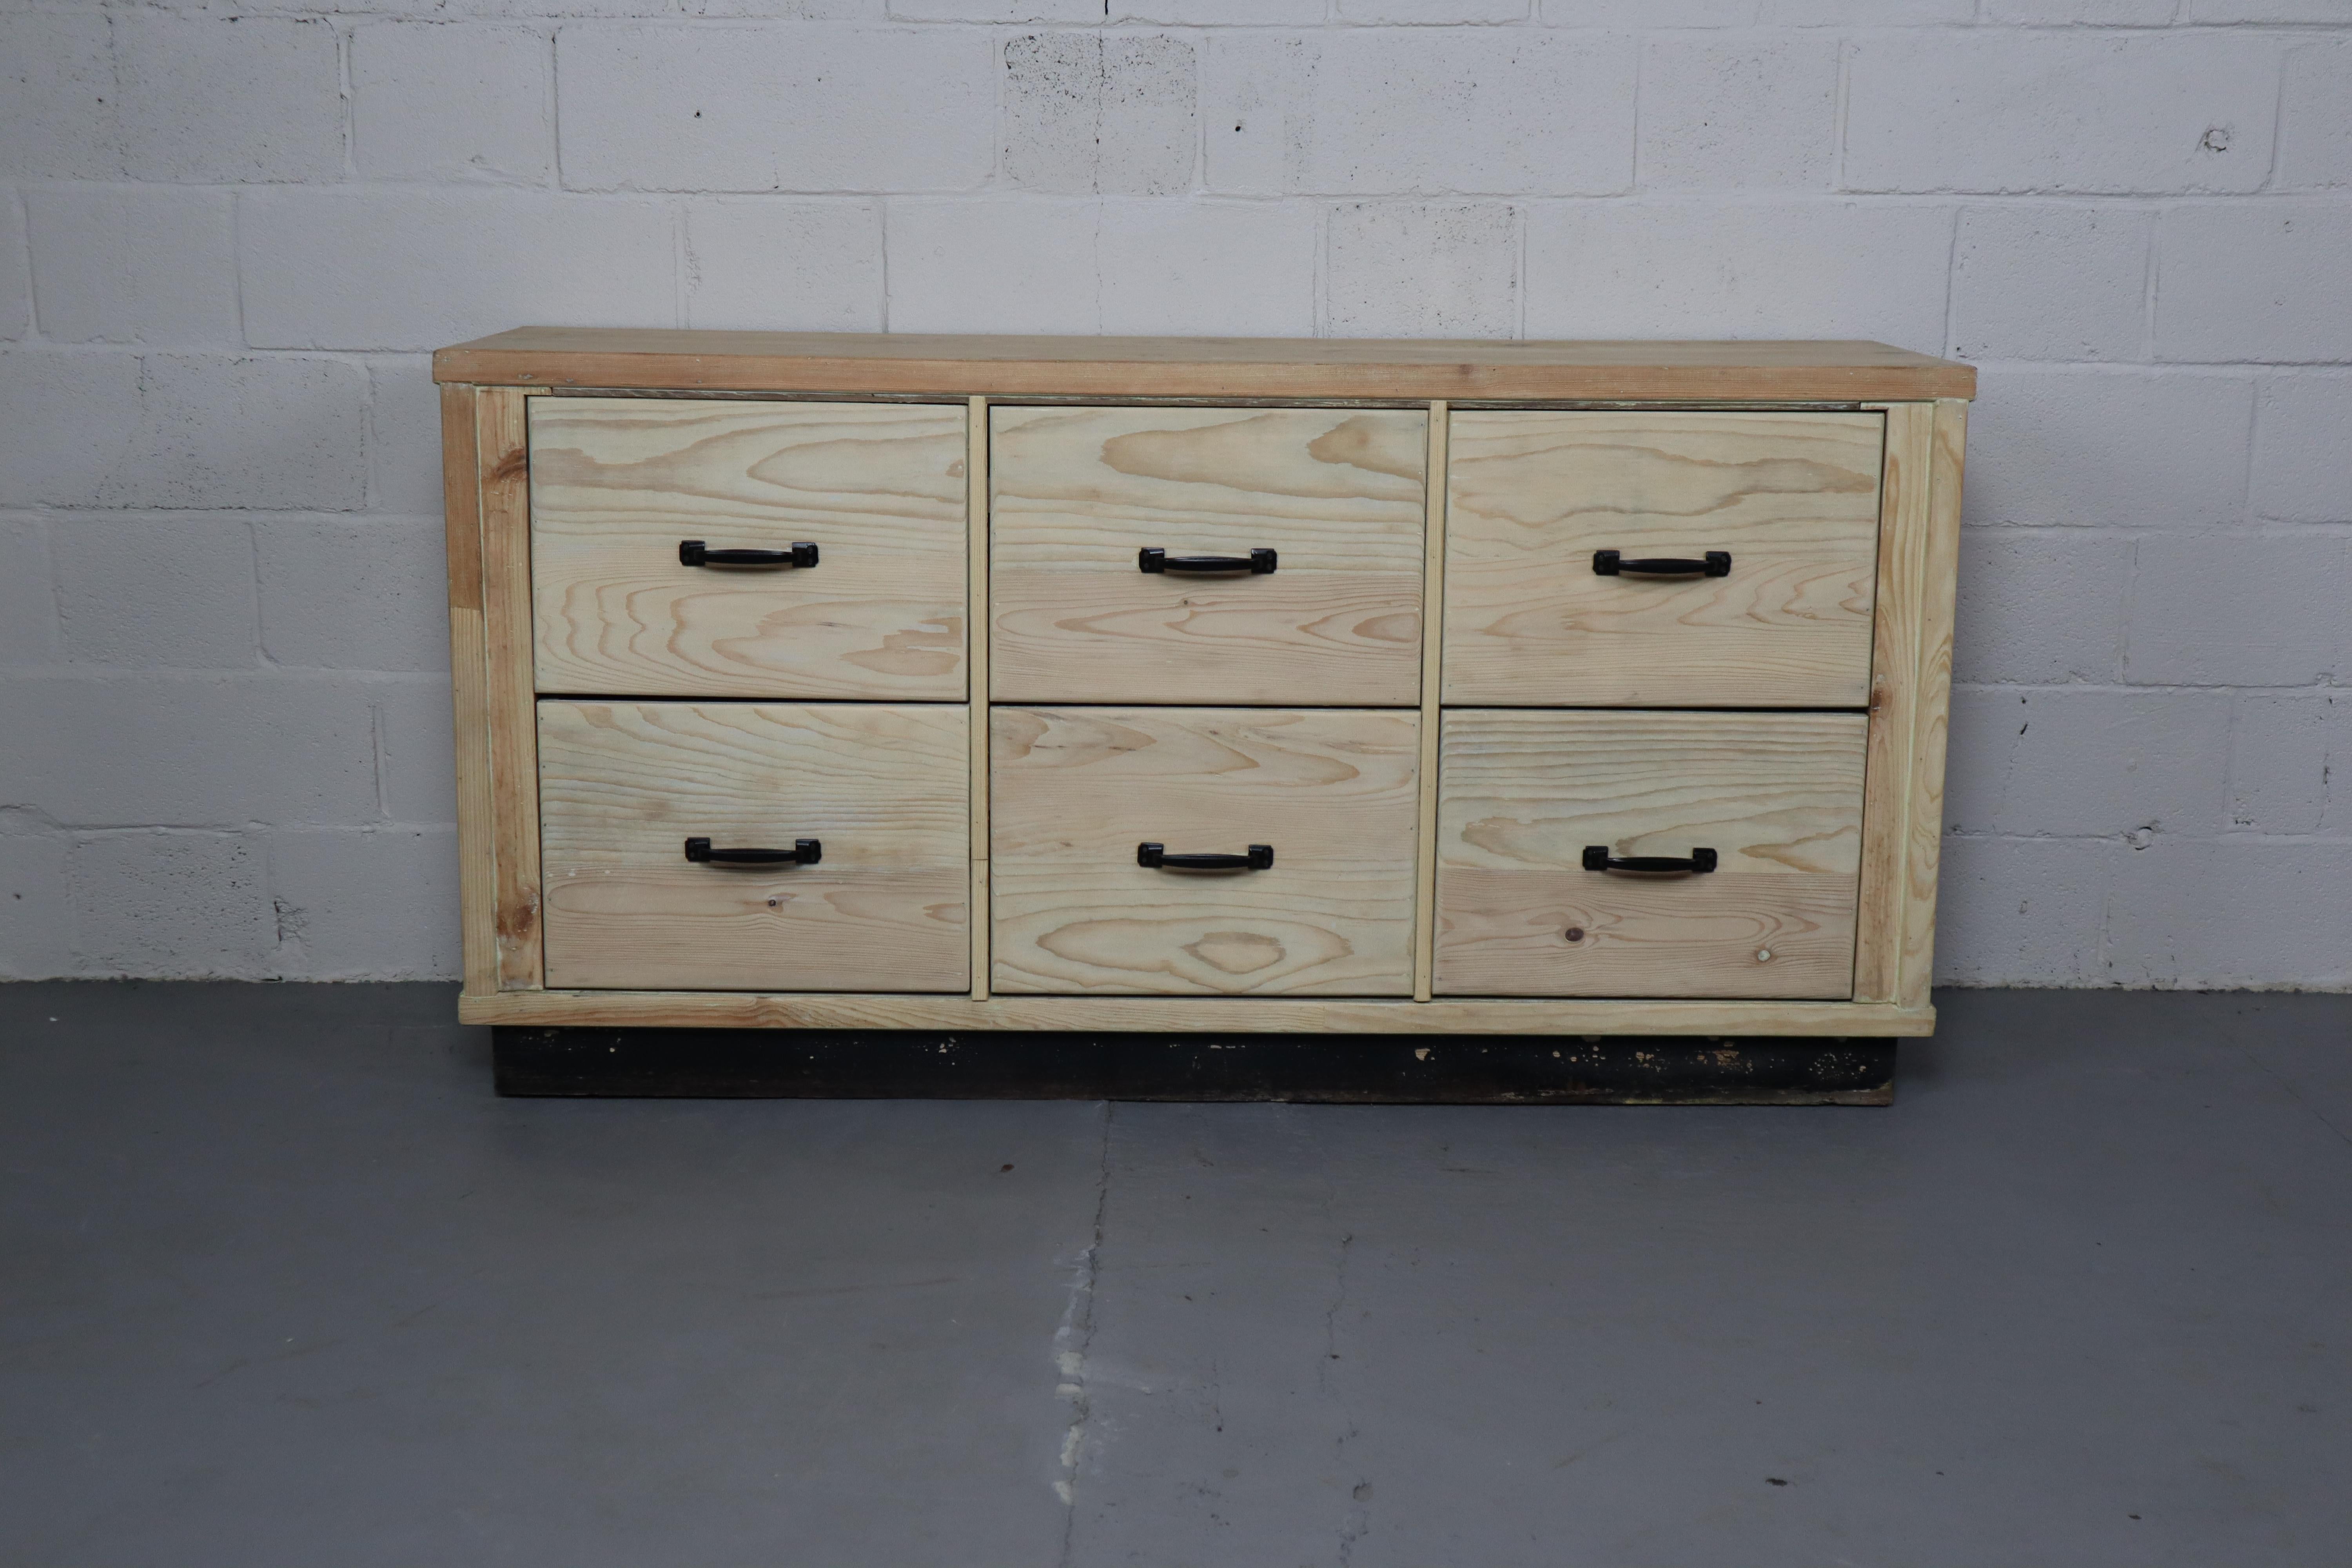 Vintage chest of drawers in Pinewood!
Six large drawers to store your stuff!
Dxhxl: 50x86x170 cm
Inside size drawers: 41,5x32x44 cm
